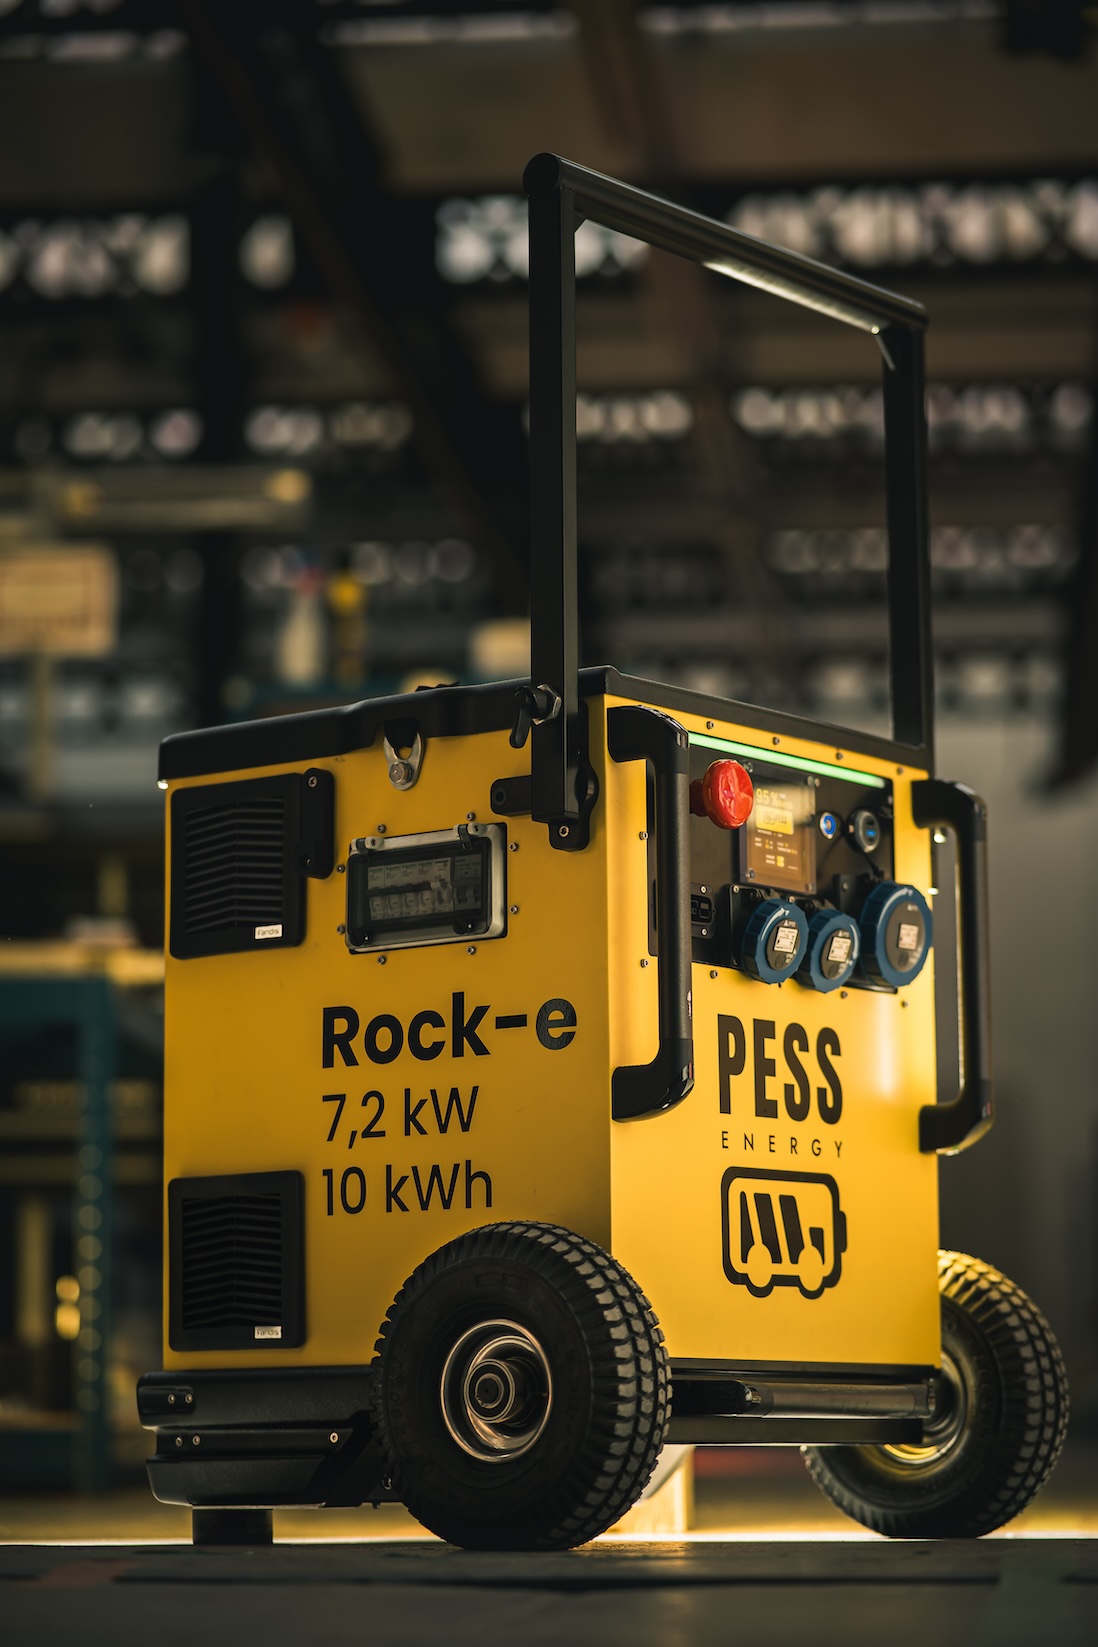 Pess Energy, an electric generator for construction sites